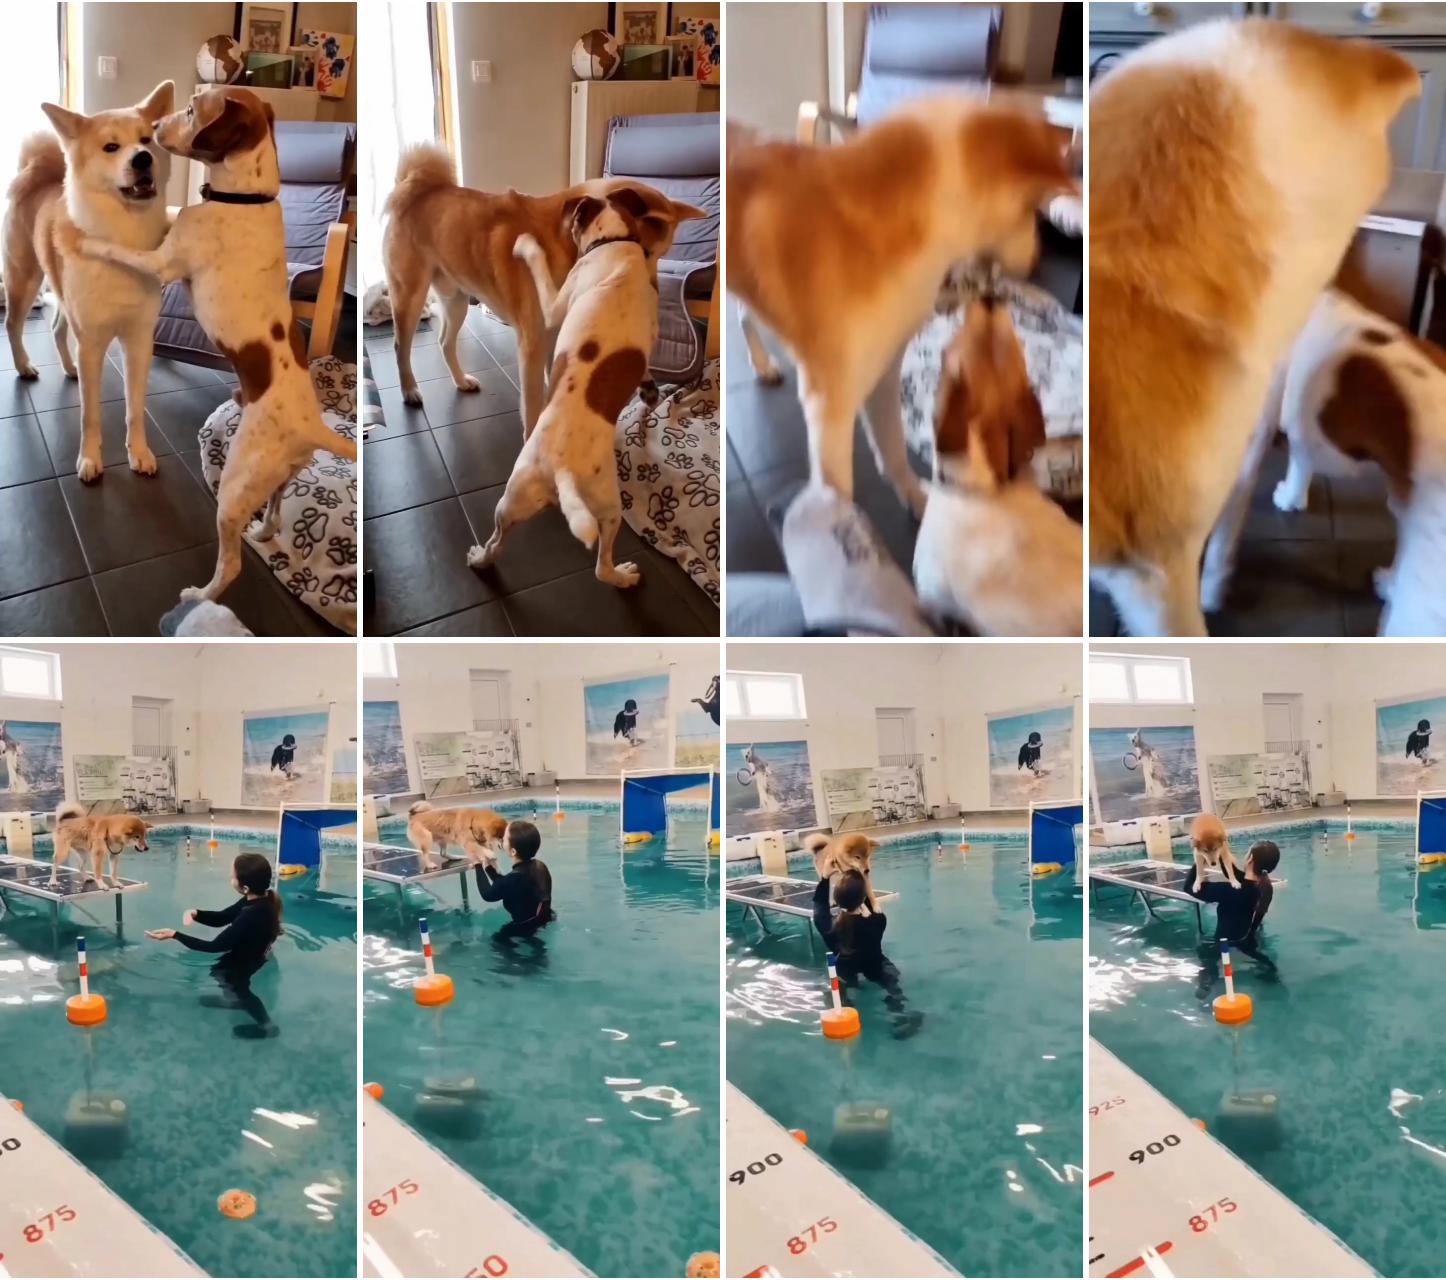 Shiba inu puppy takes his first dip hilarious and wholesome; dog kennel